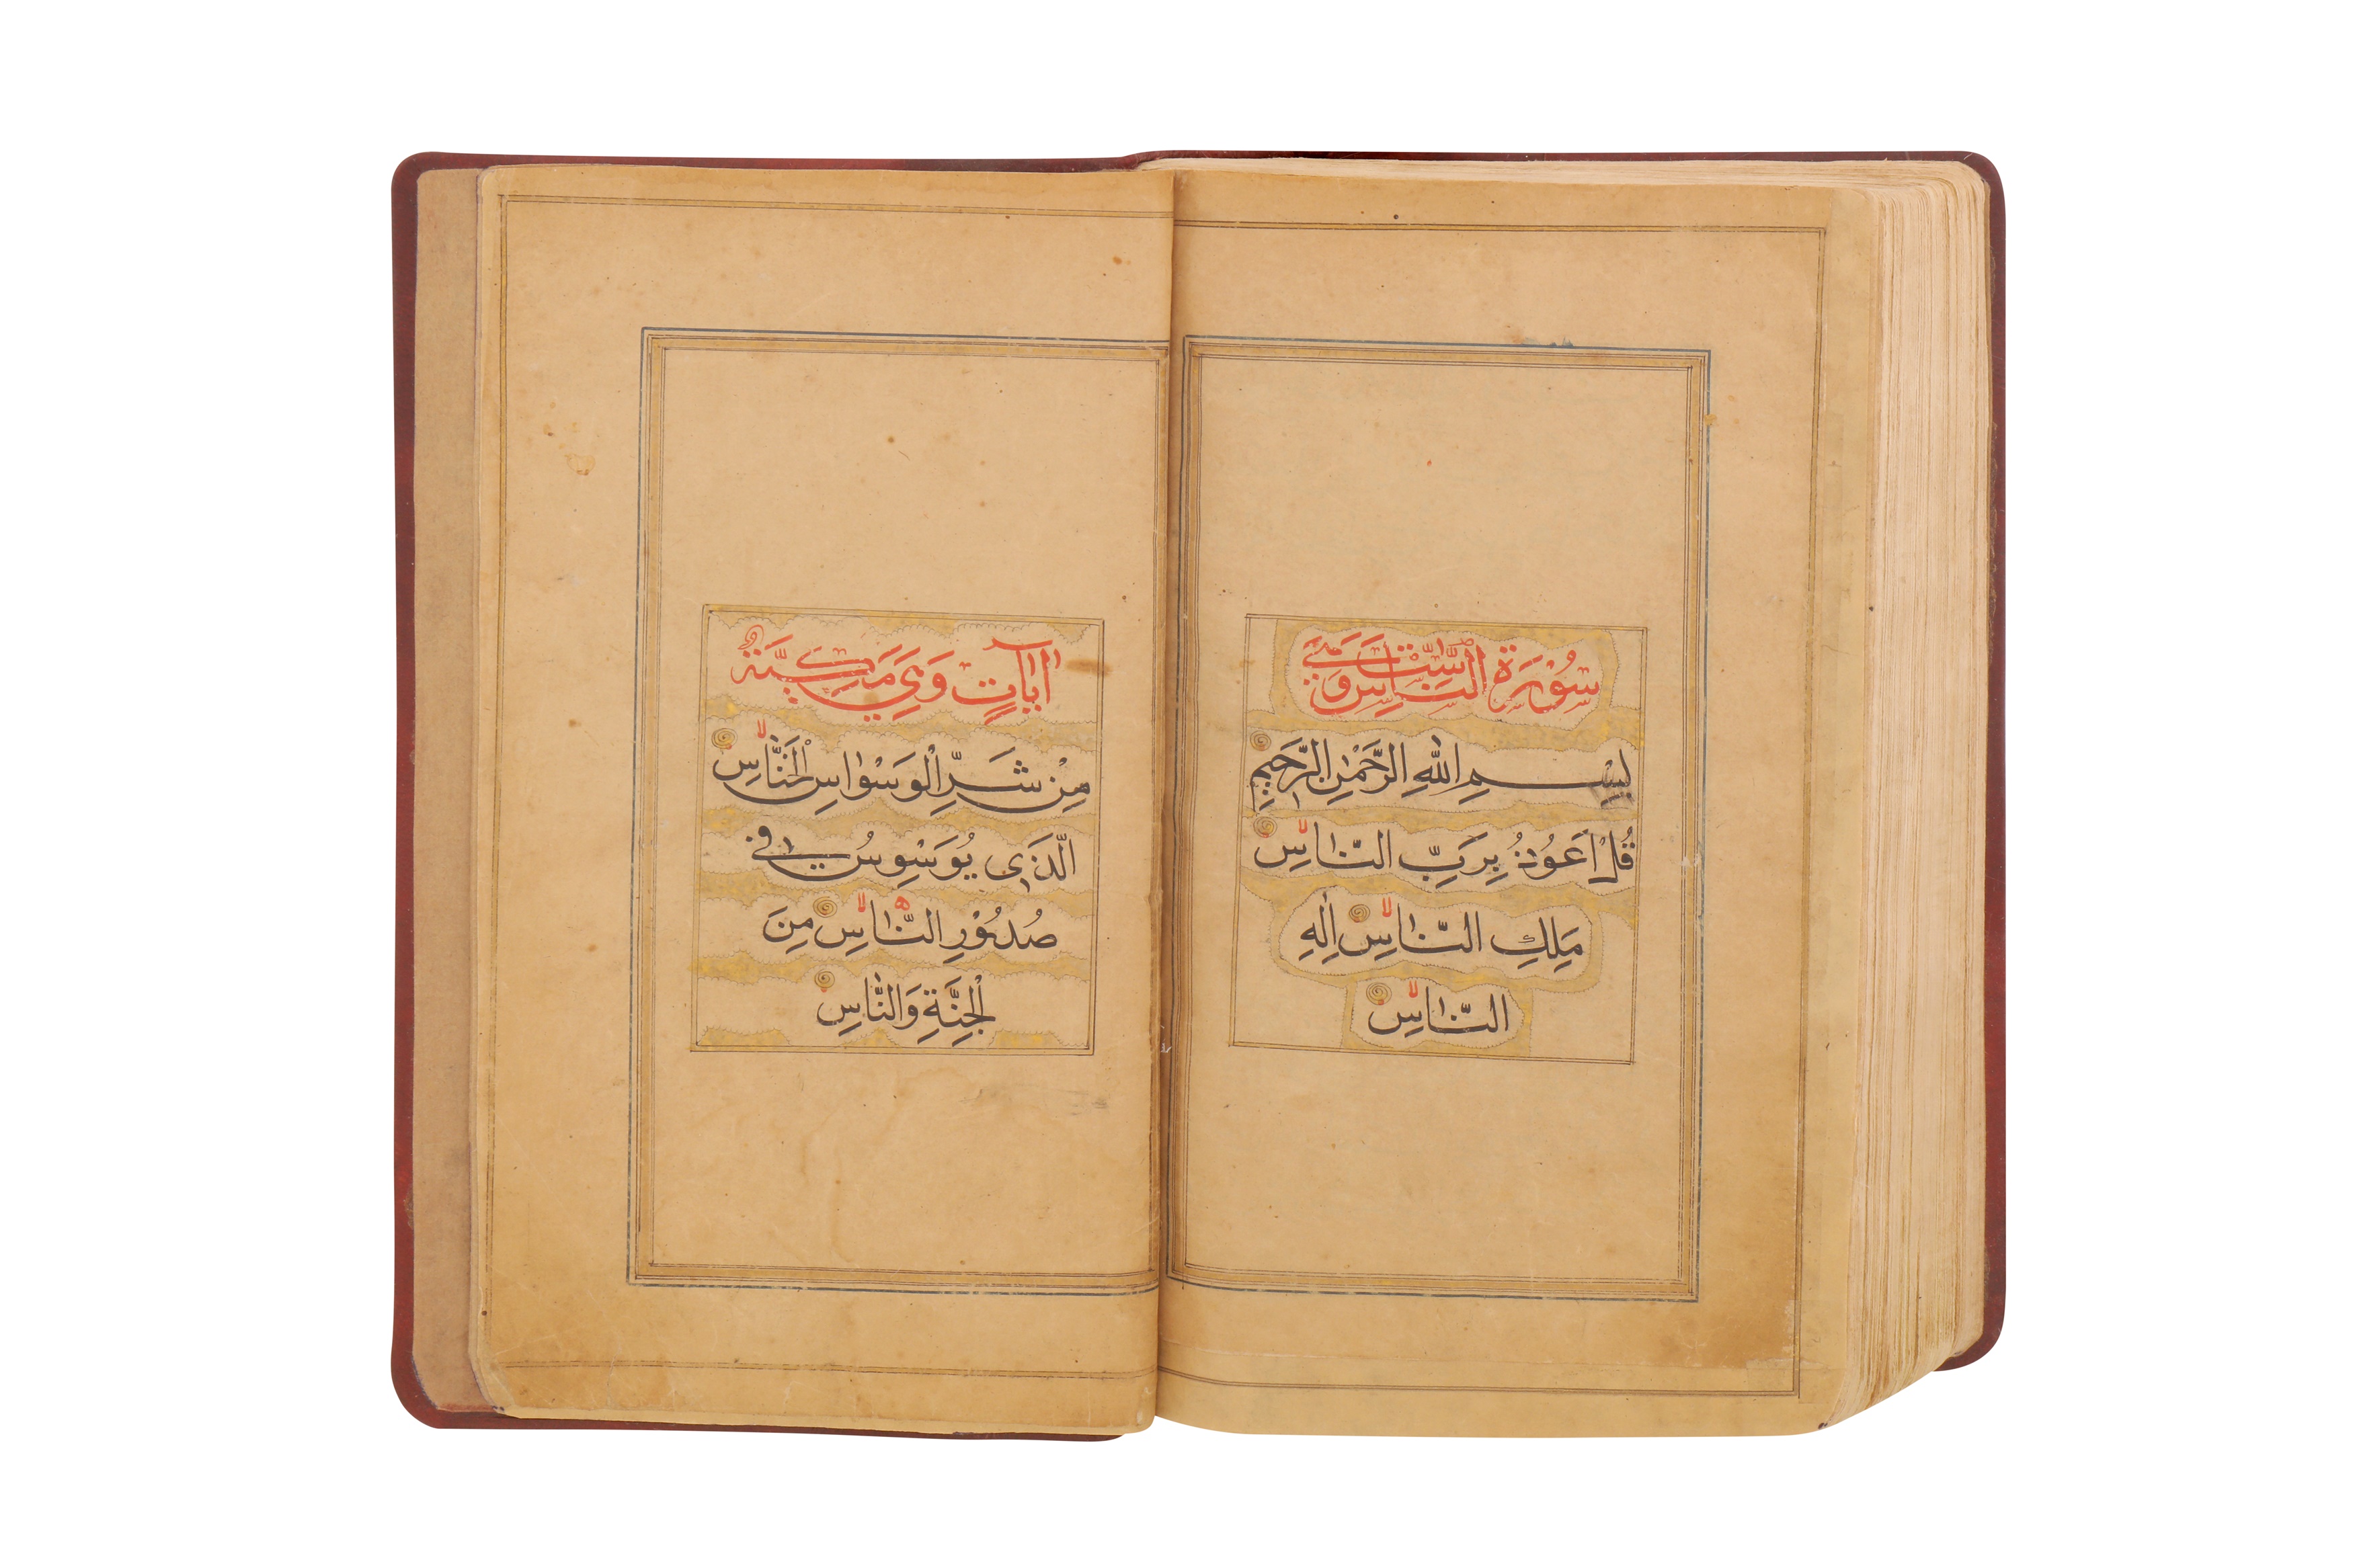 AN ILLUMINATED QUR'AN, INDIA, POSSIBLY 18TH CENTURY Kashmir, North India, probably late 18th centur - Image 5 of 8